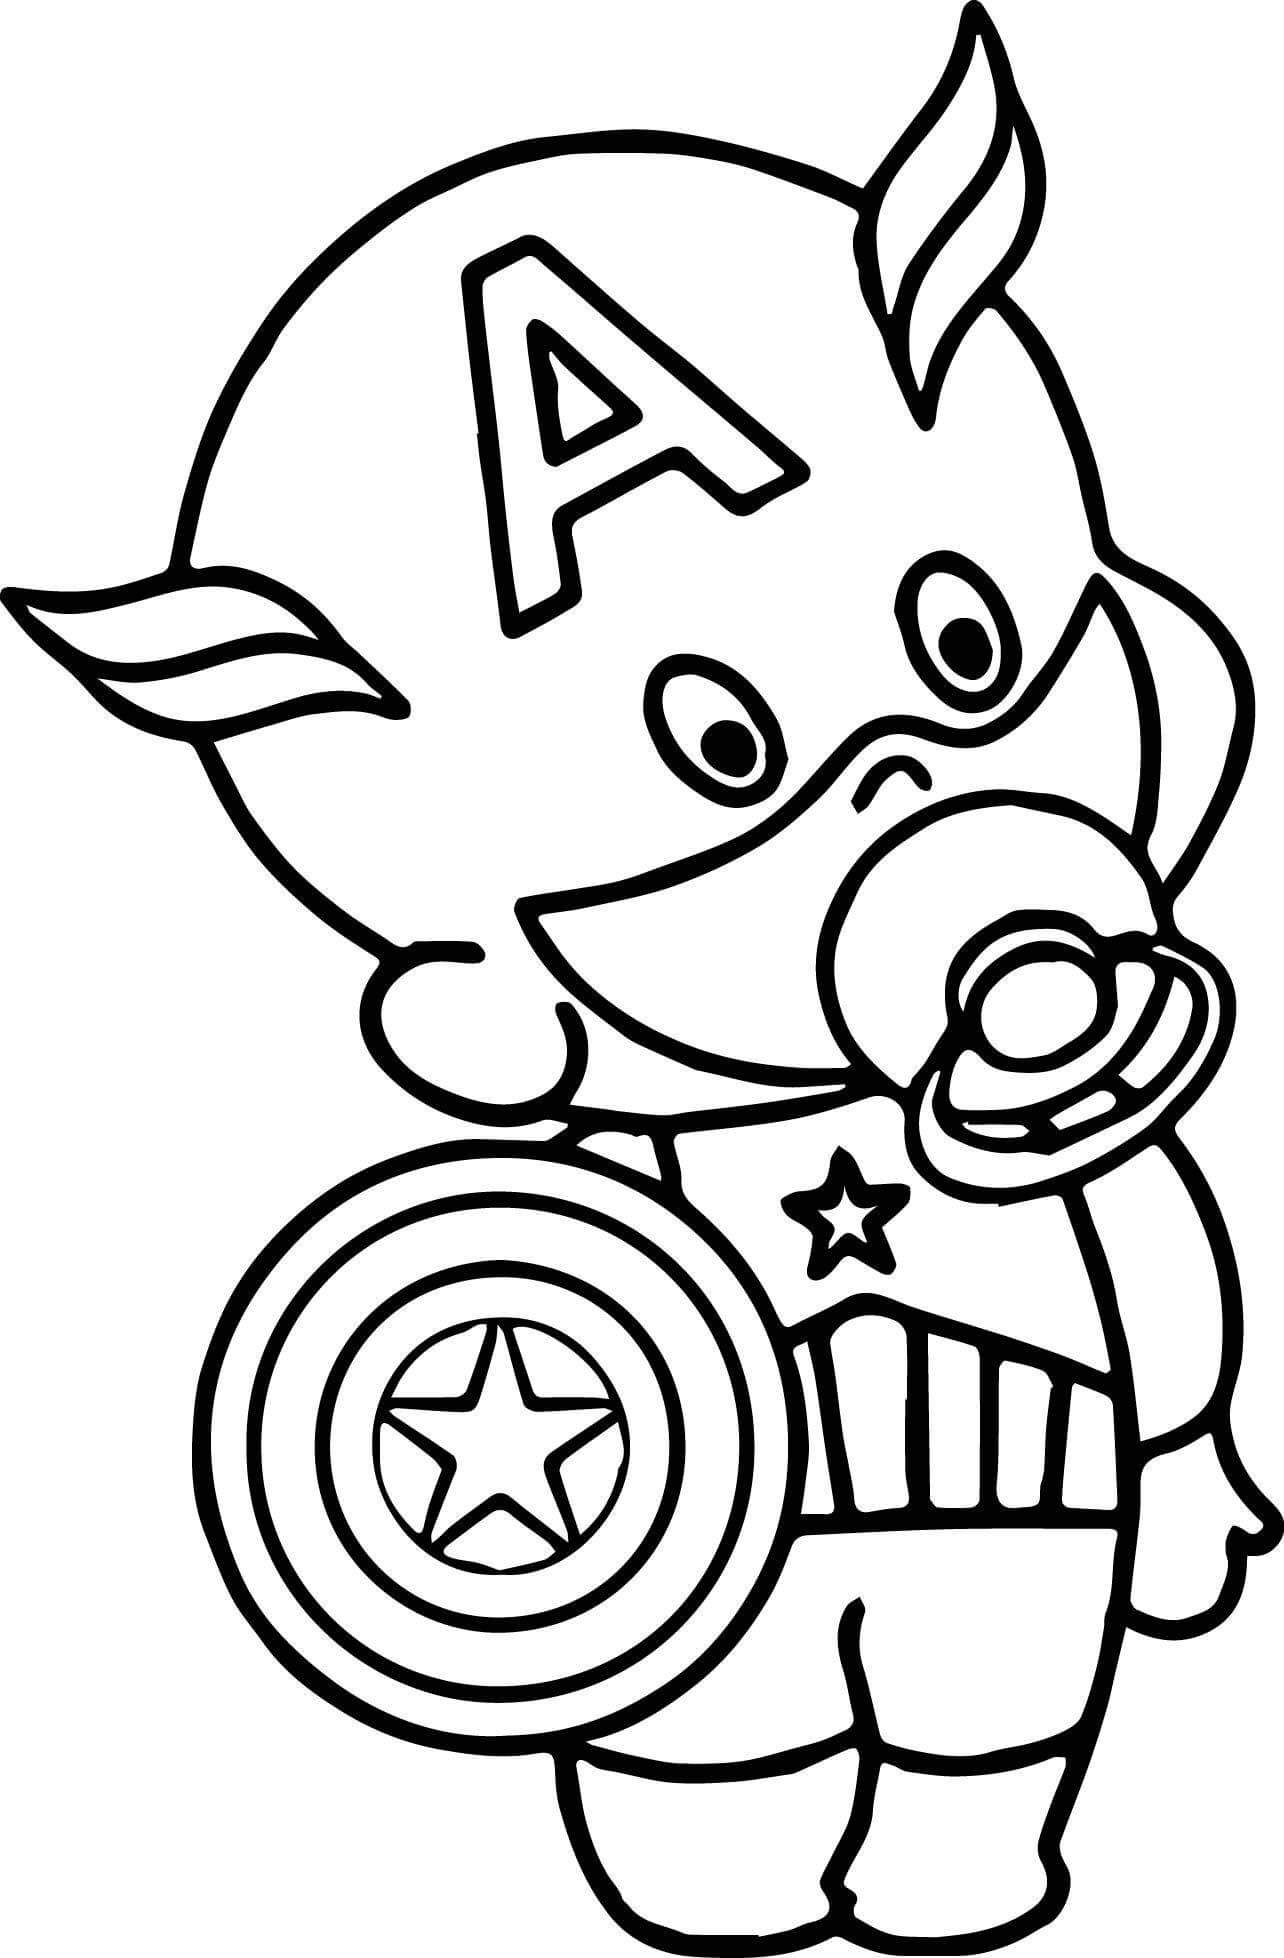 Captain America Cartoon Coloring Pages at GetDrawings Free download